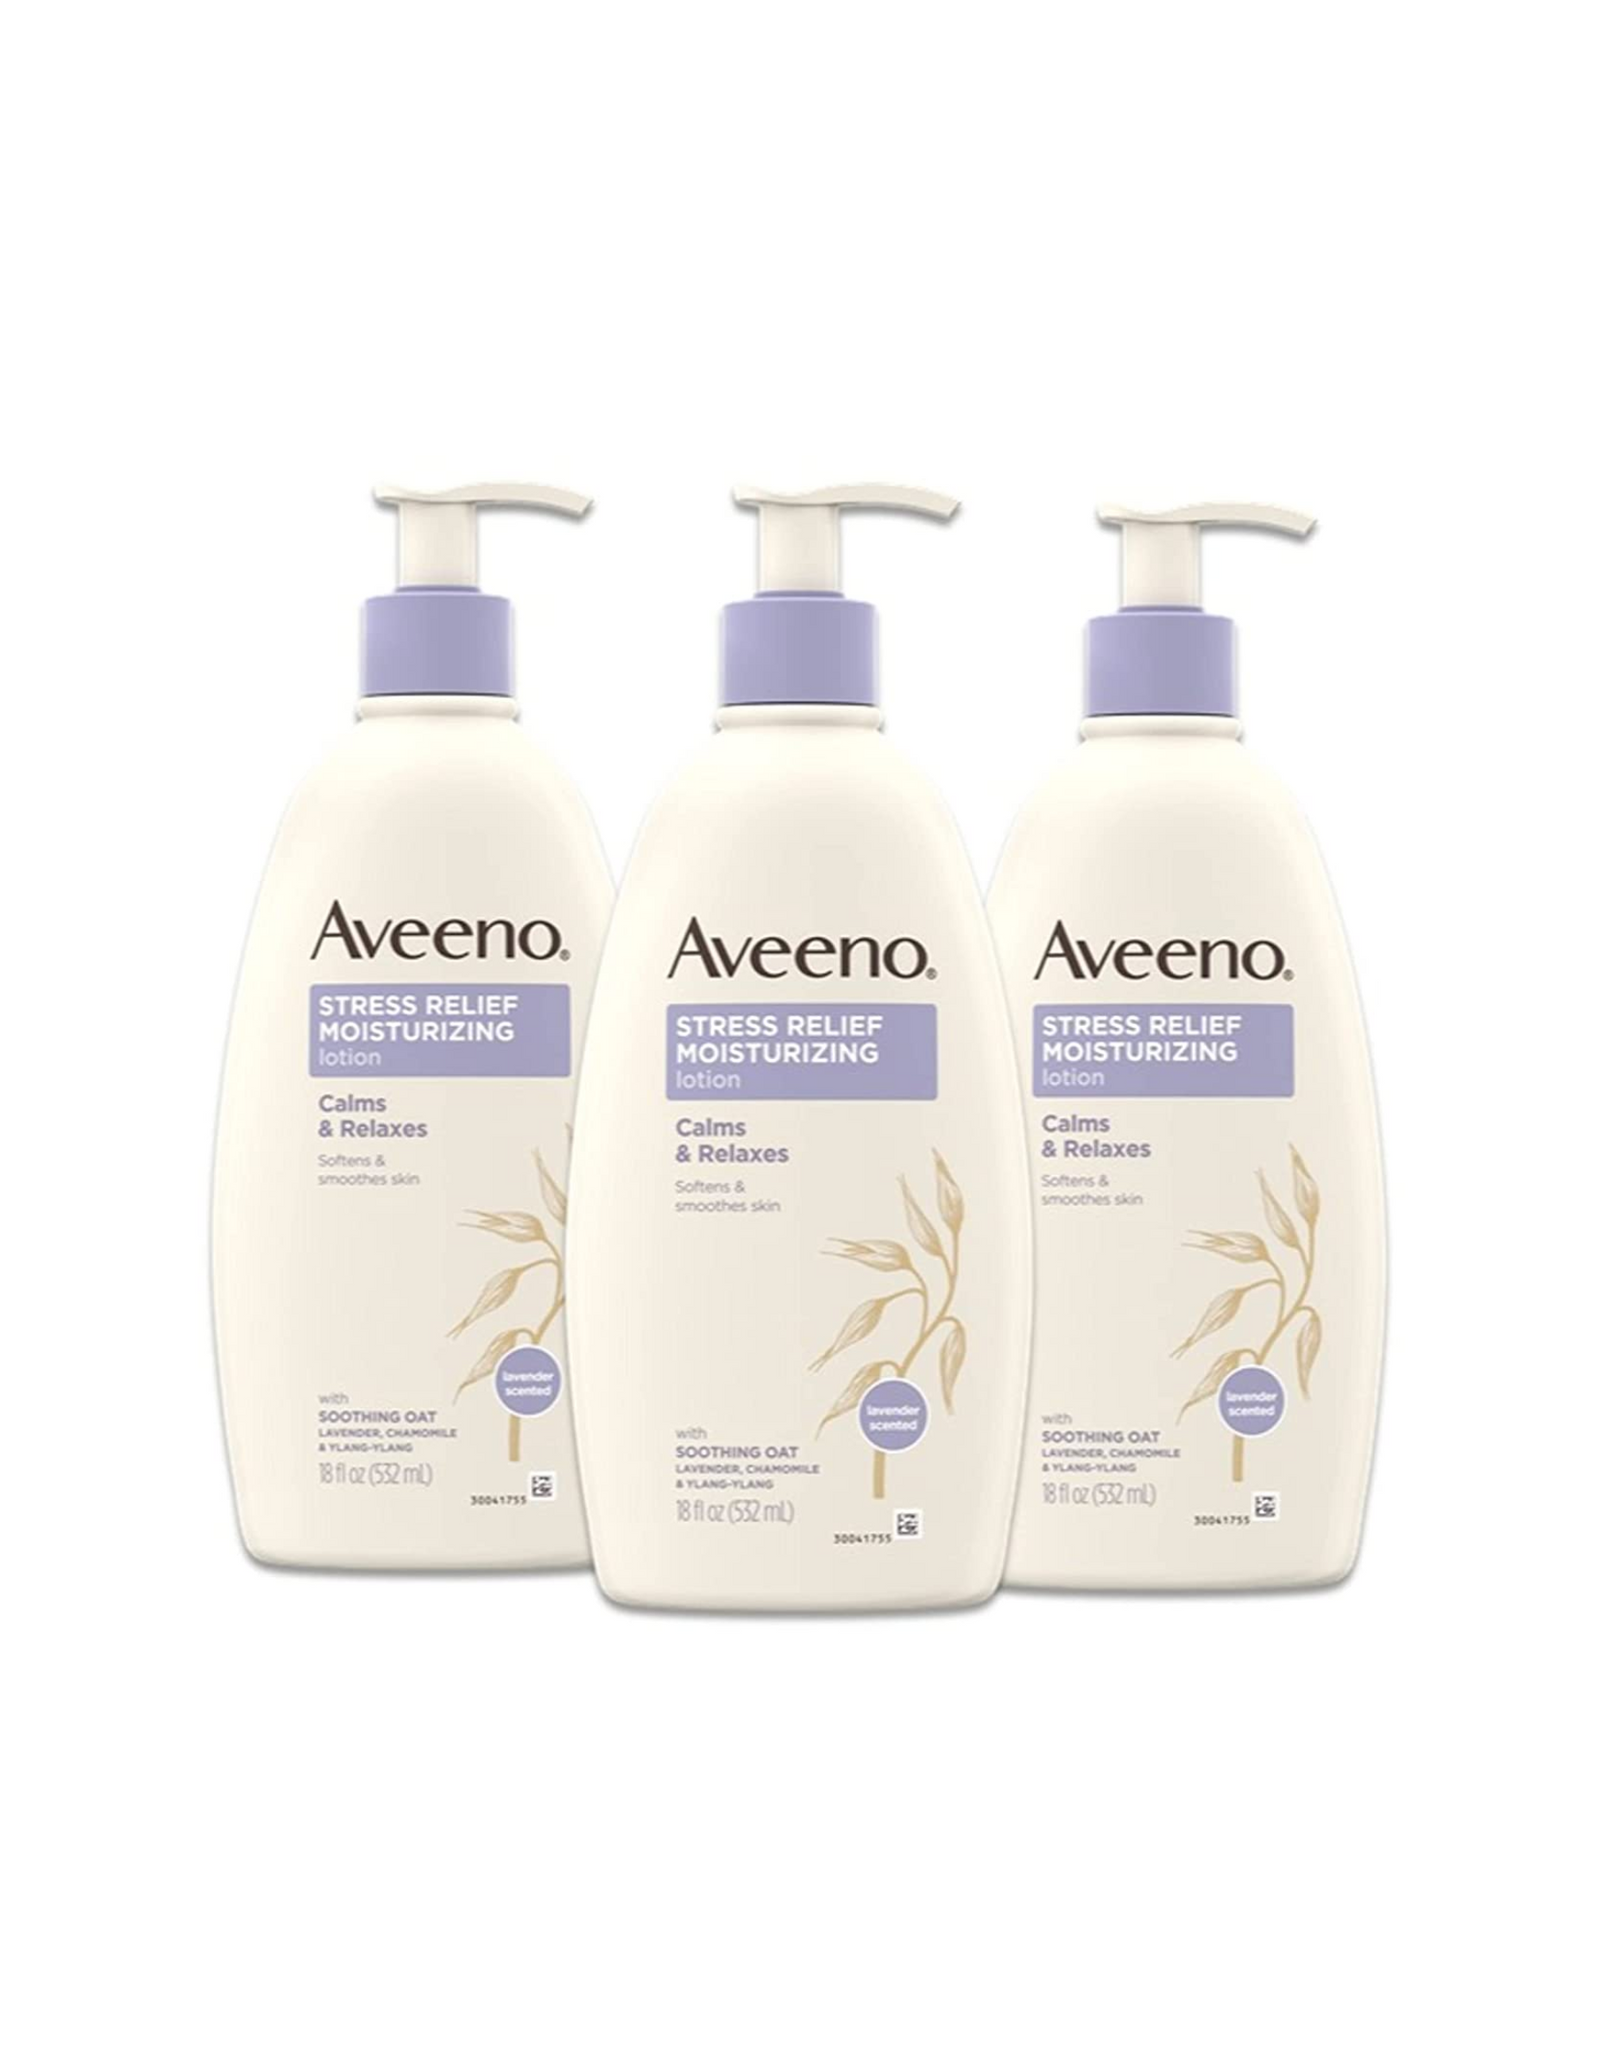 Aveeno Stress Relief Moisturizing Body Lotion with Soothing Oat Lavender, Chamomile & Ylang-Ylang, 18 fl oz (Pack of 3)